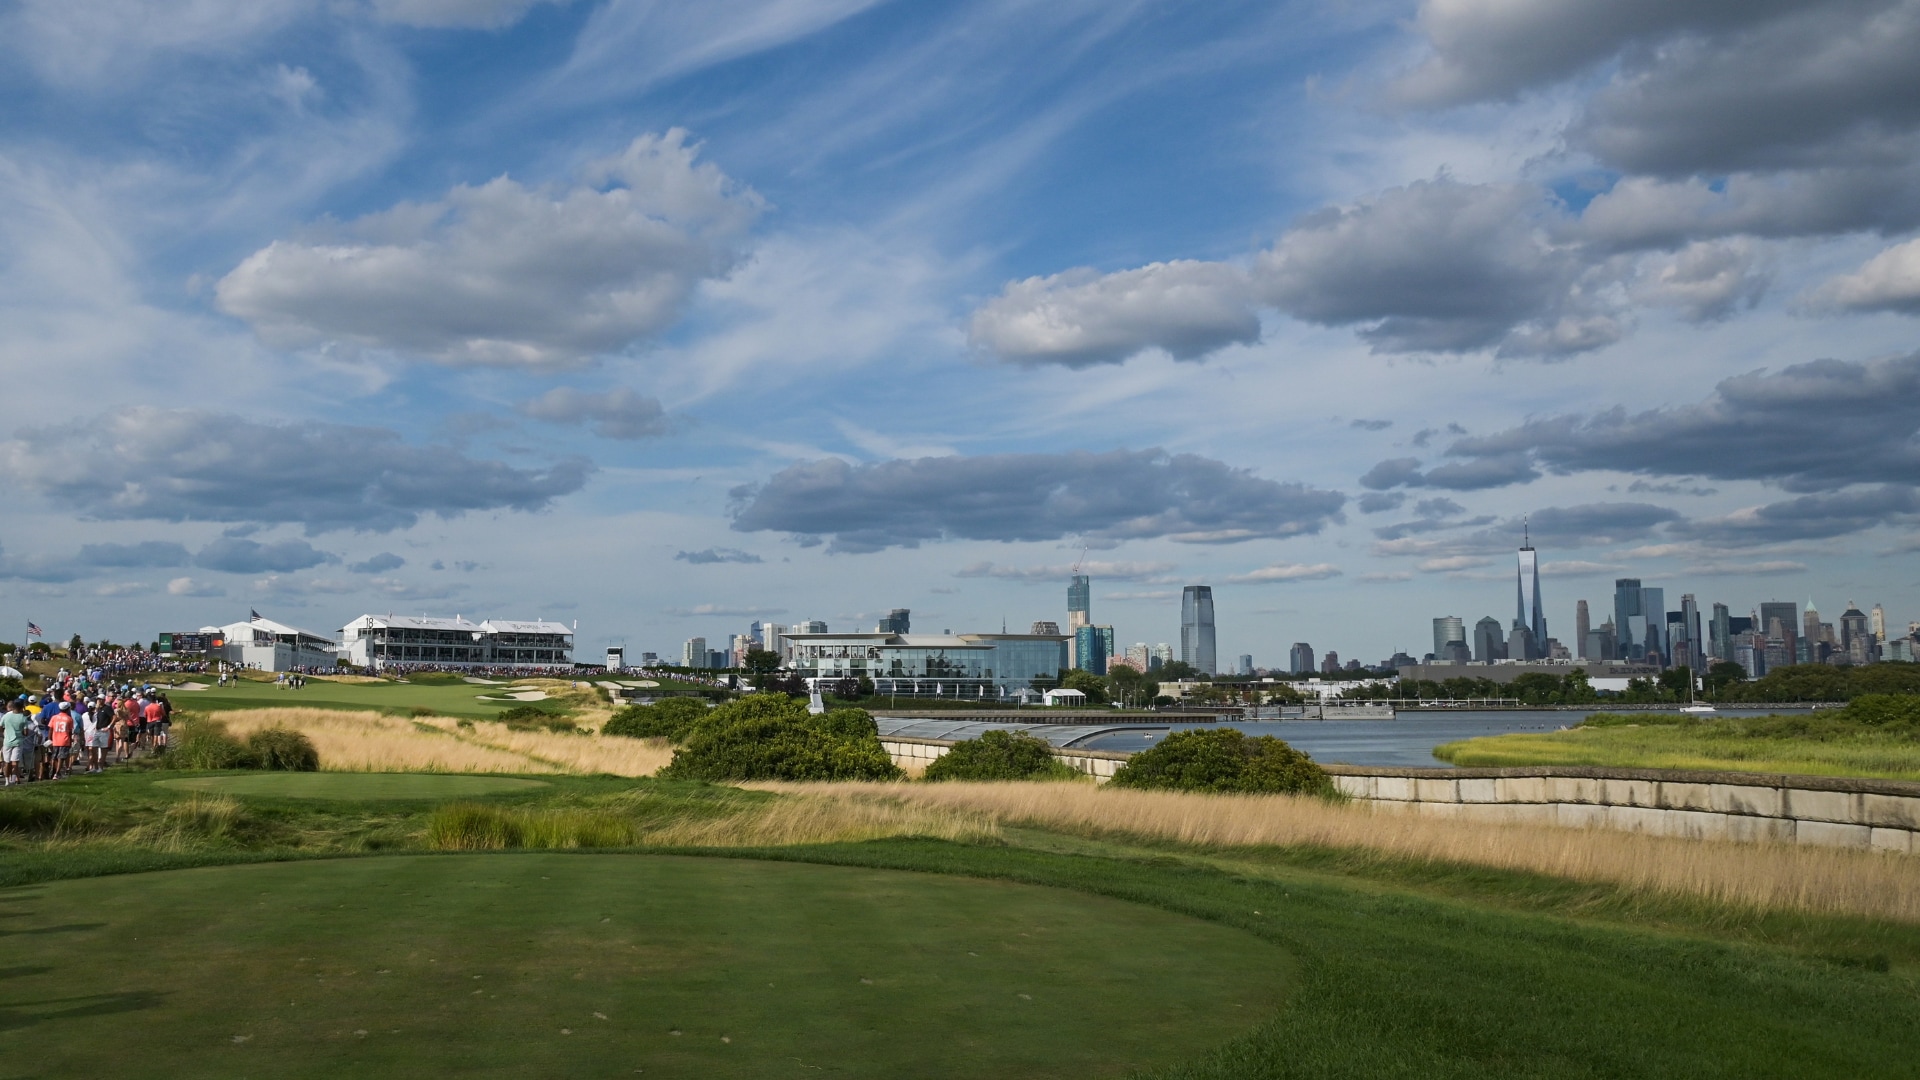 Michelle Wie West to host inaugural LPGA/AJGA event at Liberty National in 2023